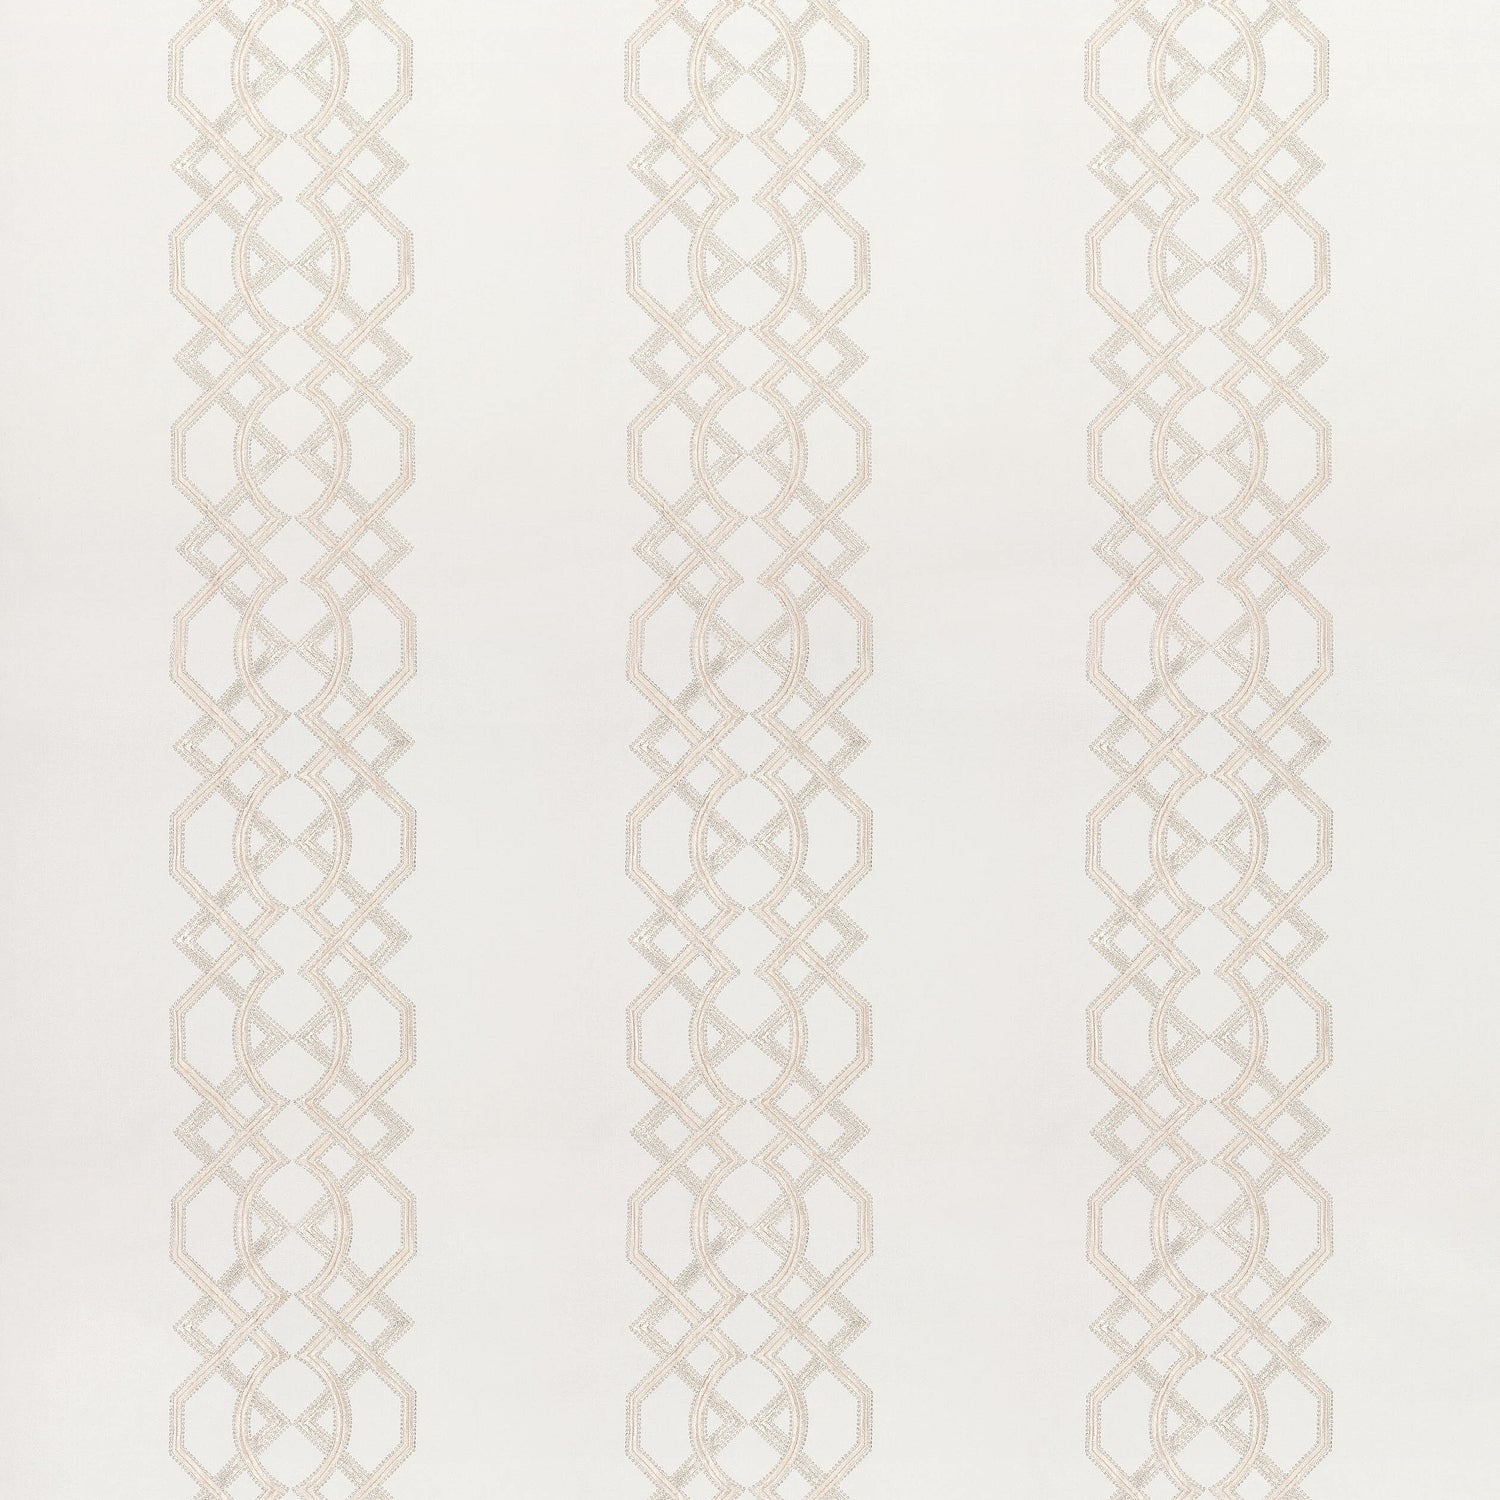 Bergman Embroidery fabric in off white color - pattern number AW9127 - by Anna French in the Natural Glimmer collection